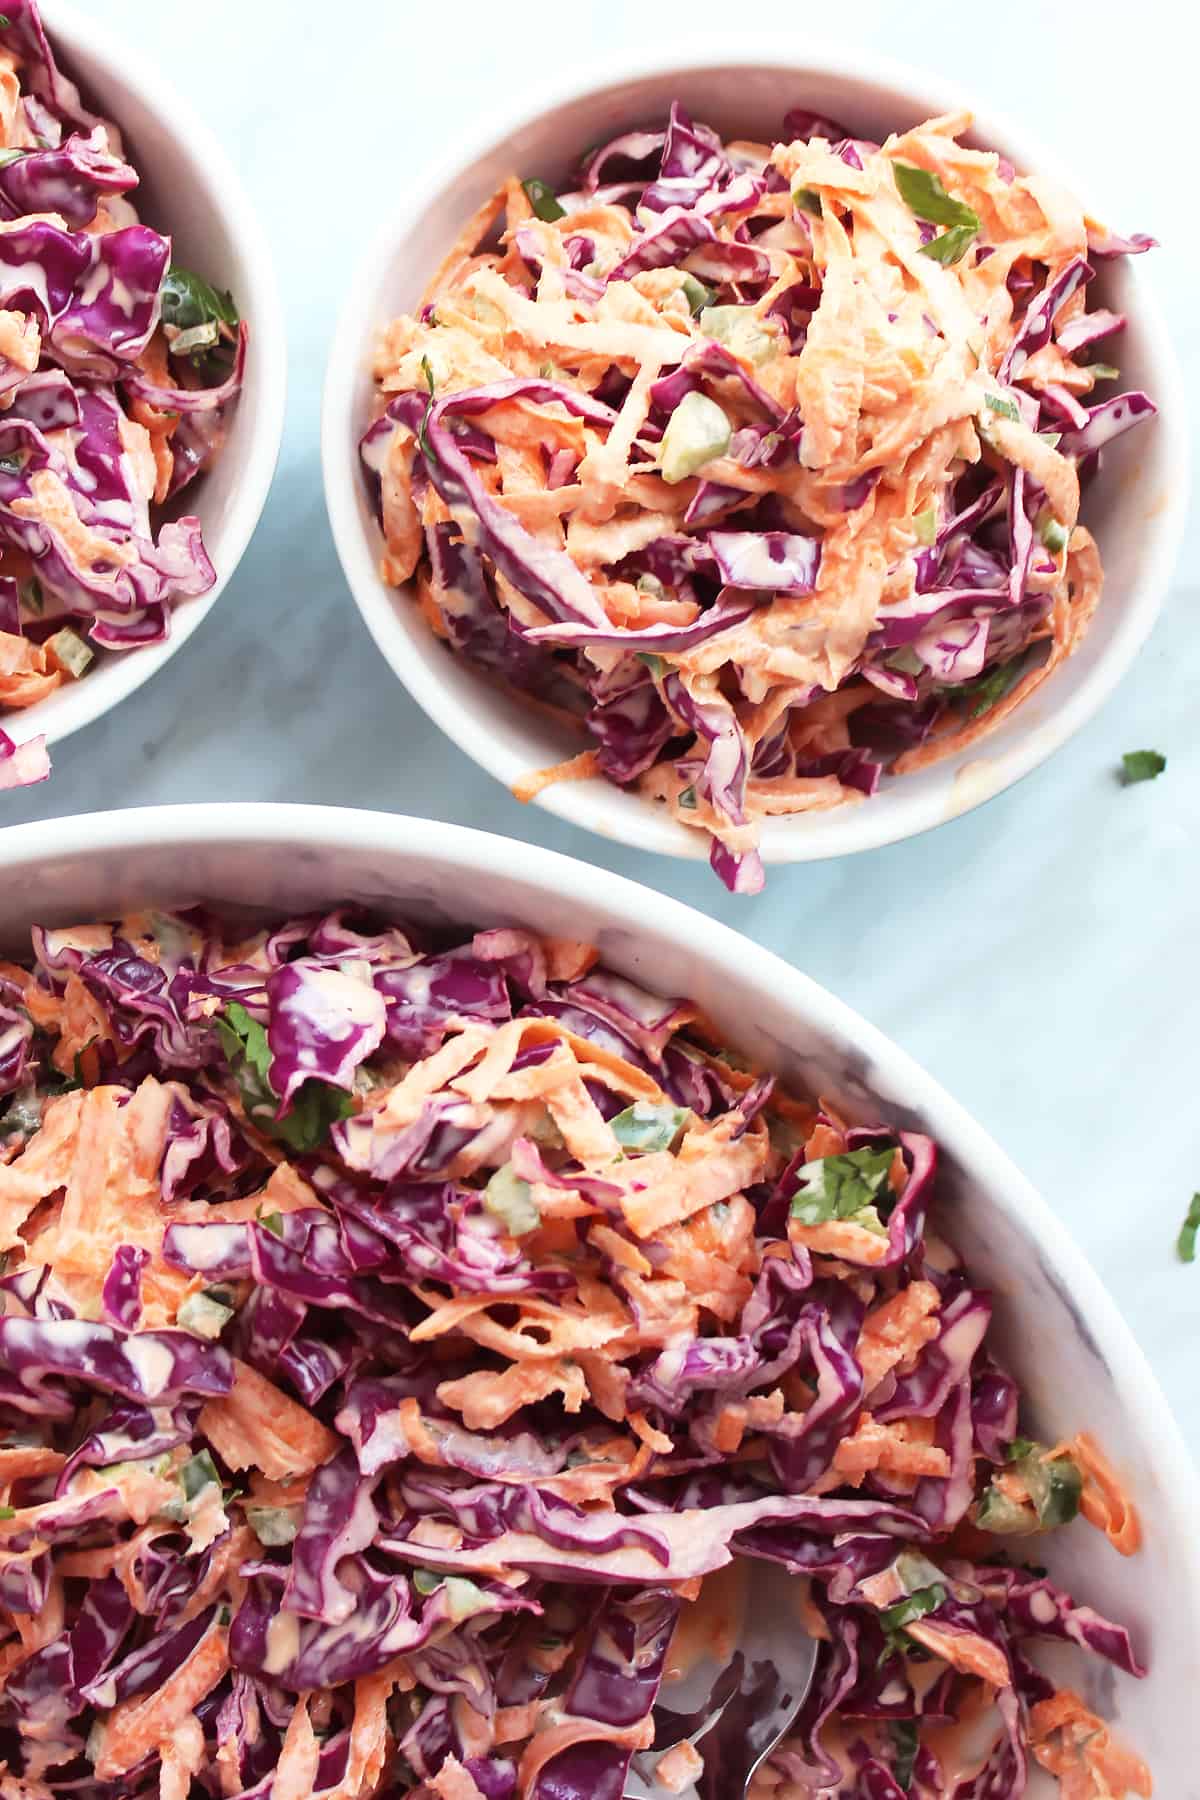 Slaw served into two smaller bowls